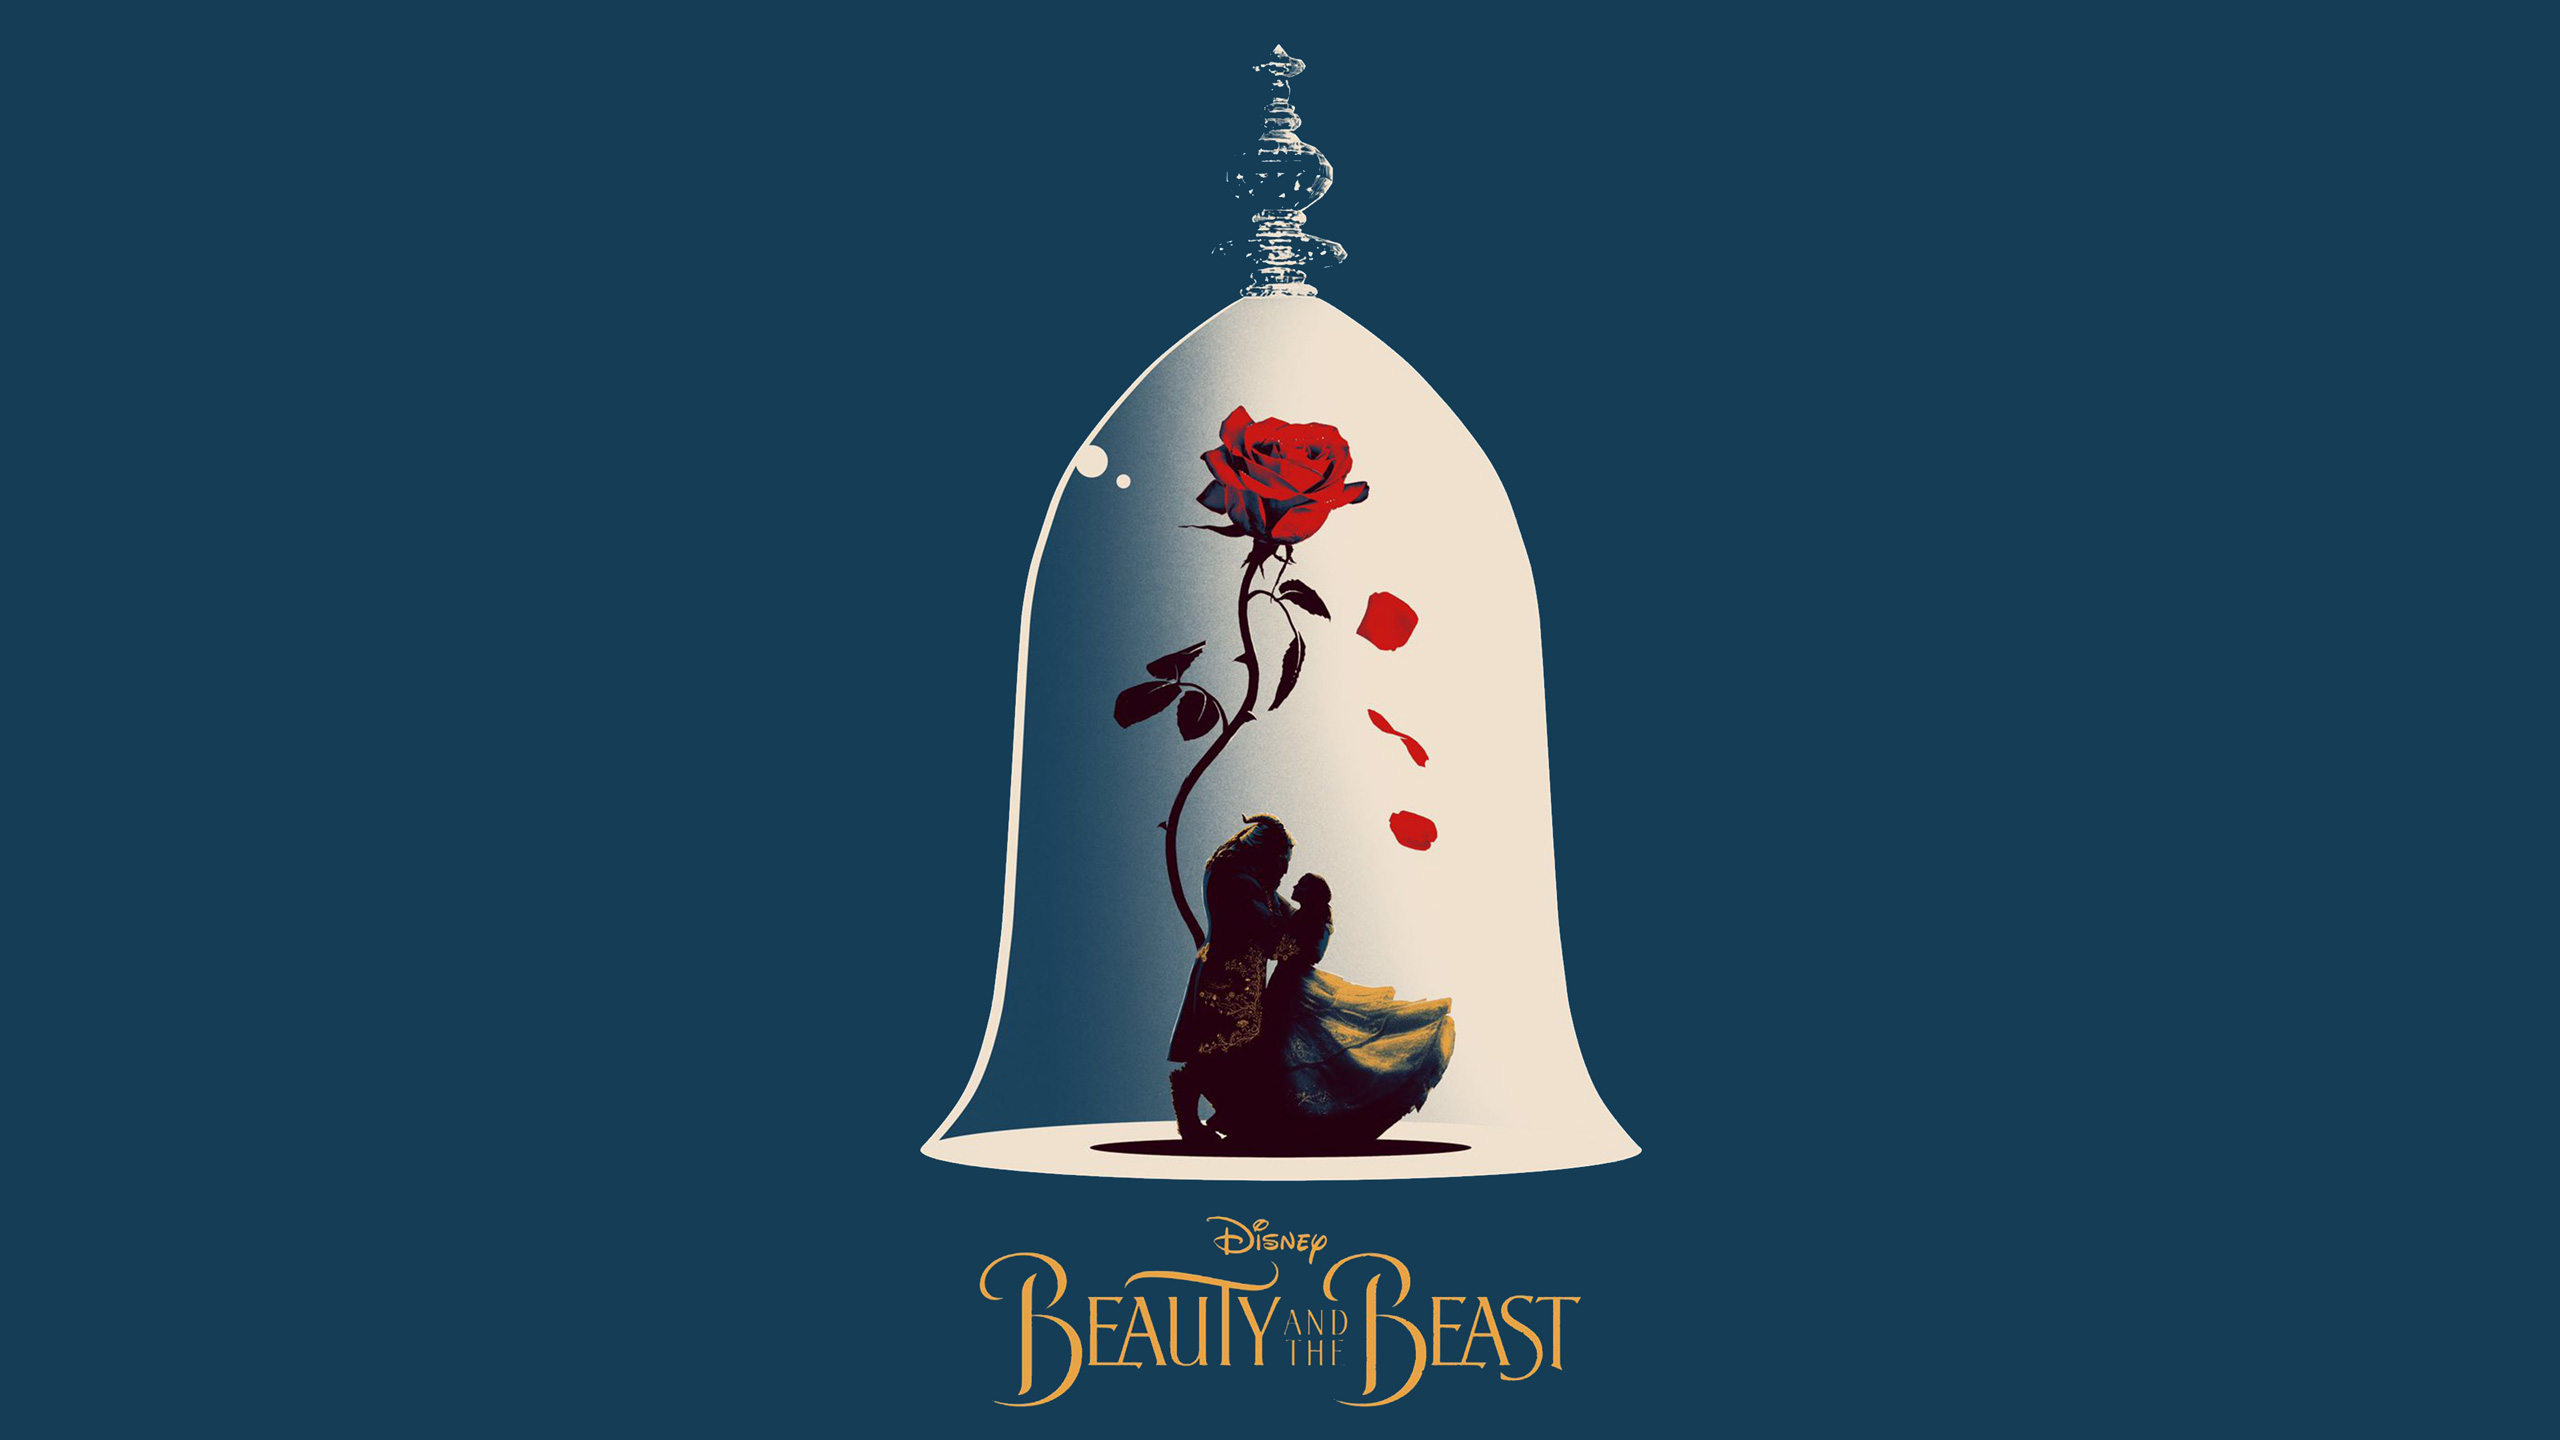 Beauty And The Beast, Artwork - Beauty And The Beast Iphone , HD Wallpaper & Backgrounds